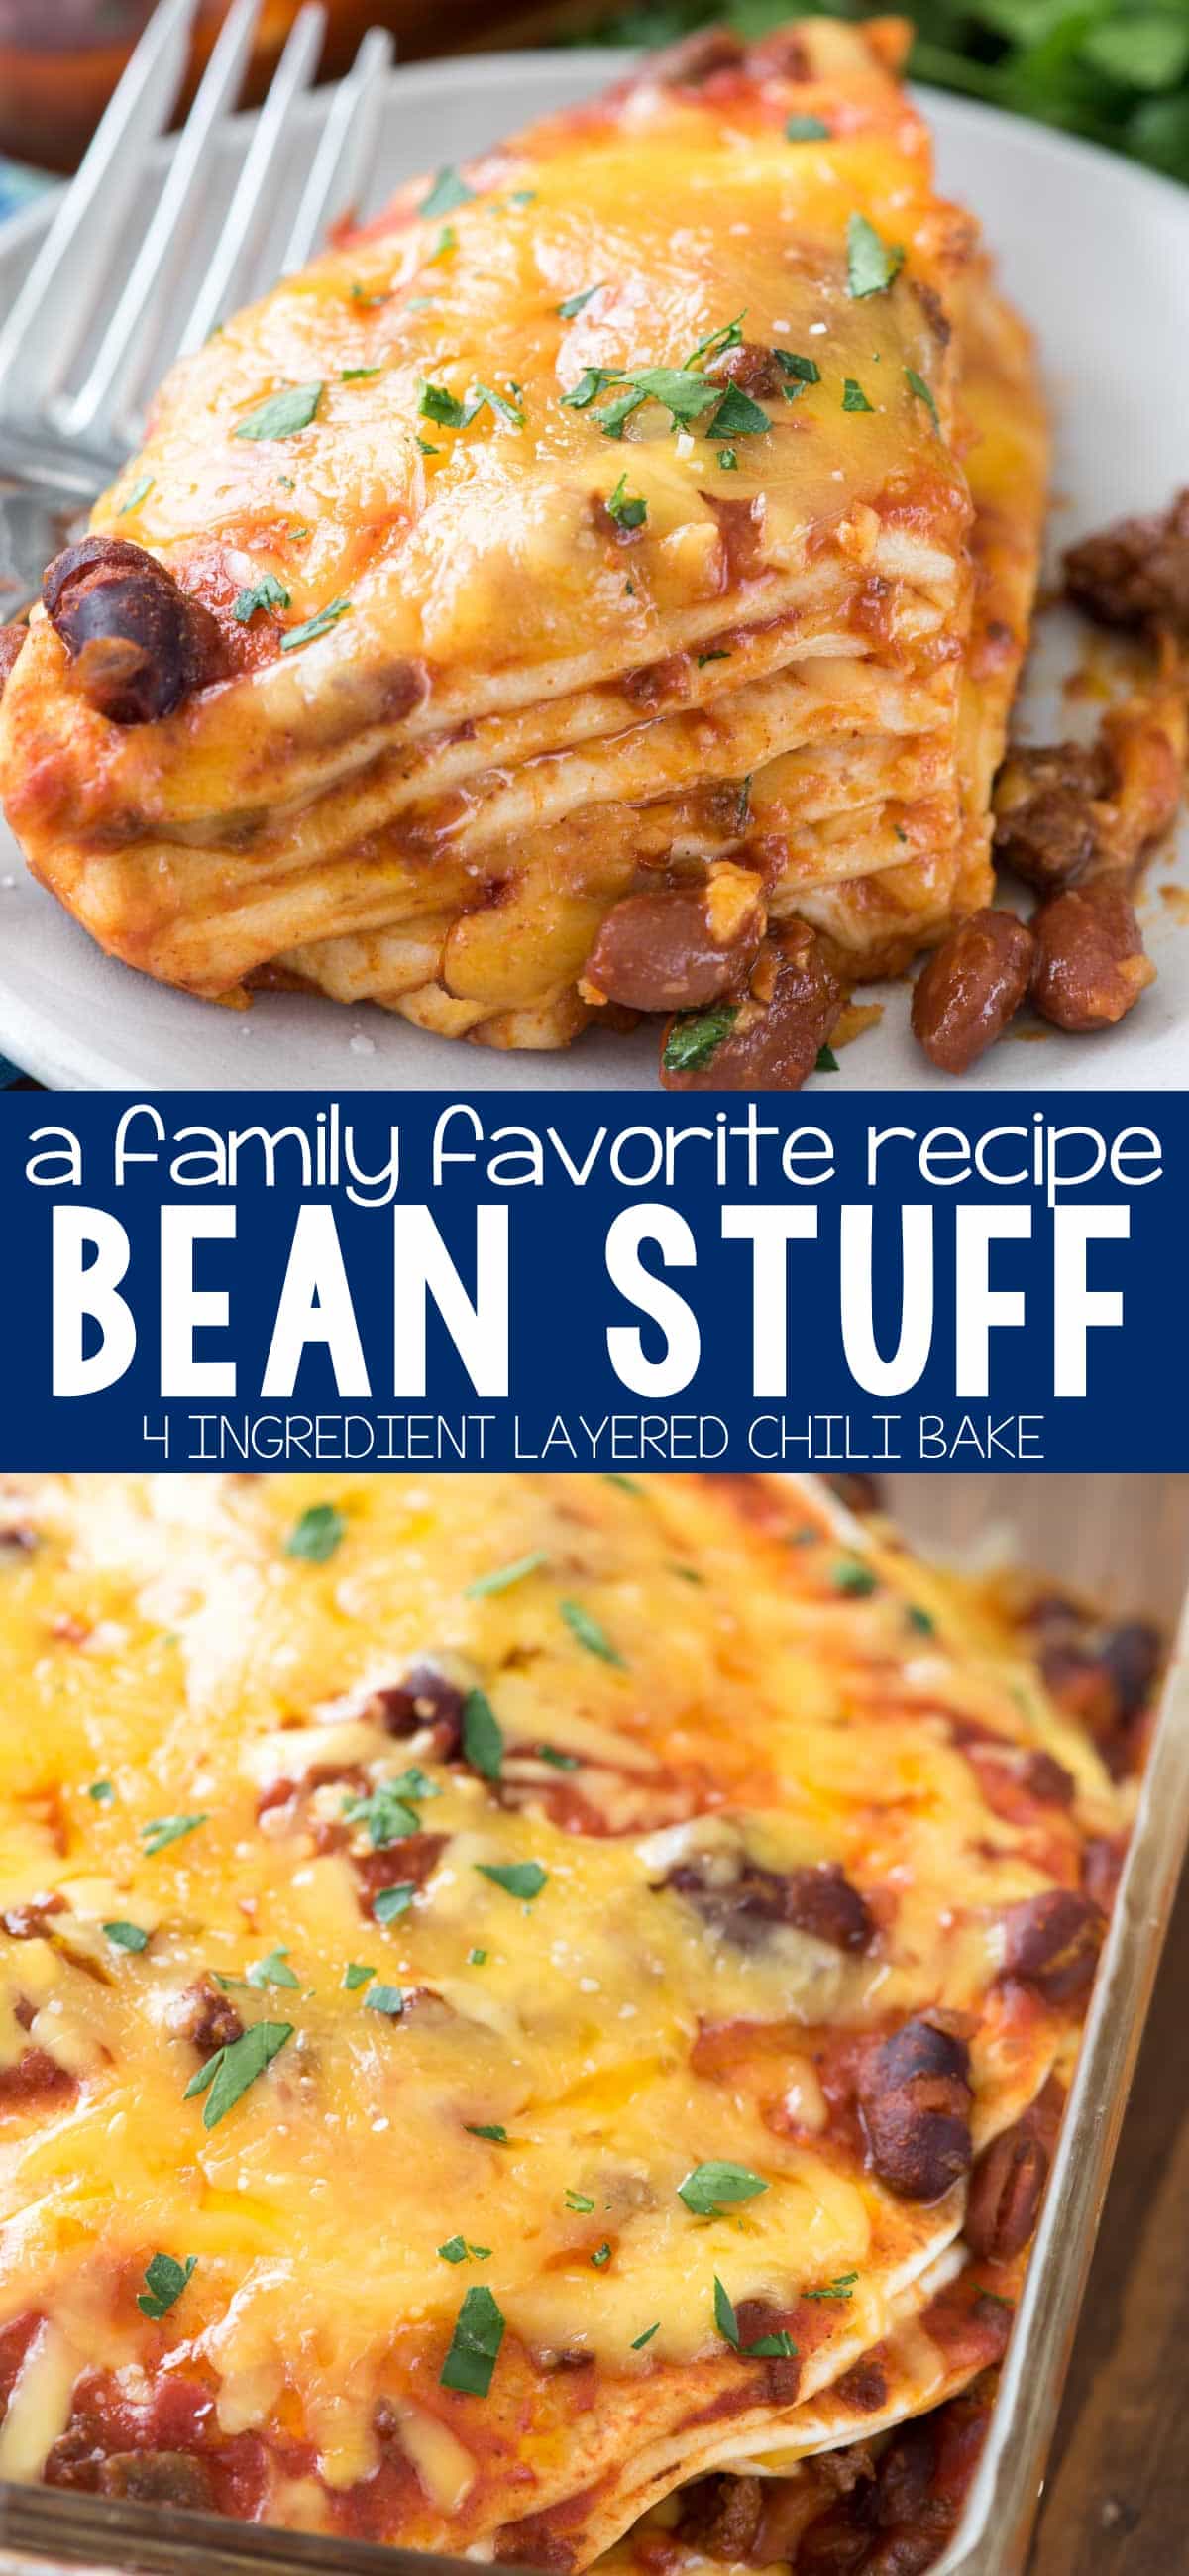 Bean Stuff - this easy 4 ingredient casserole recipe is a family favorite. It's a great easy weeknight dinner! We've been eating it for generations and everyone loves it!